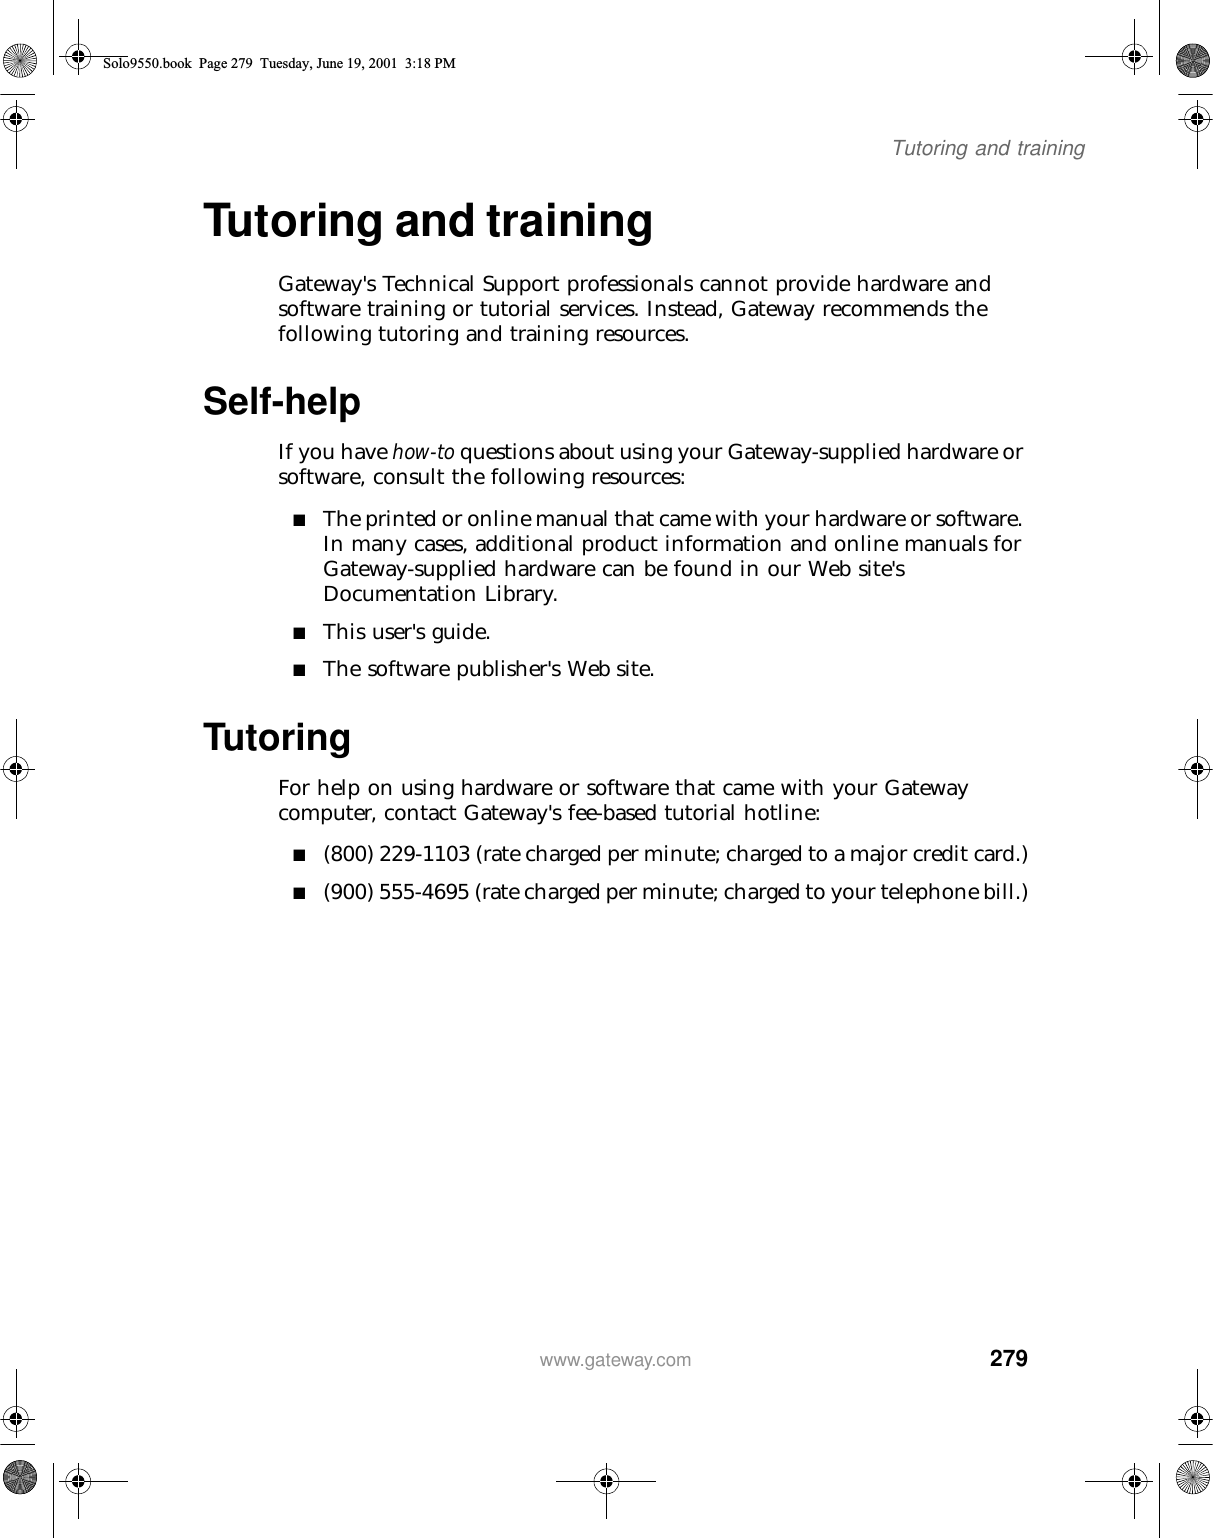 279Tutoring and trainingwww.gateway.comTutoring and trainingGateway&apos;s Technical Support professionals cannot provide hardware and software training or tutorial services. Instead, Gateway recommends the following tutoring and training resources.Self-helpIf you have how-to questions about using your Gateway-supplied hardware or software, consult the following resources:■The printed or online manual that came with your hardware or software. In many cases, additional product information and online manuals for Gateway-supplied hardware can be found in our Web site&apos;s Documentation Library.■This user&apos;s guide.■The software publisher&apos;s Web site.TutoringFor help on using hardware or software that came with your Gateway computer, contact Gateway&apos;s fee-based tutorial hotline:■(800) 229-1103 (rate charged per minute; charged to a major credit card.)■(900) 555-4695 (rate charged per minute; charged to your telephone bill.)Solo9550.book Page 279 Tuesday, June 19, 2001 3:18 PM